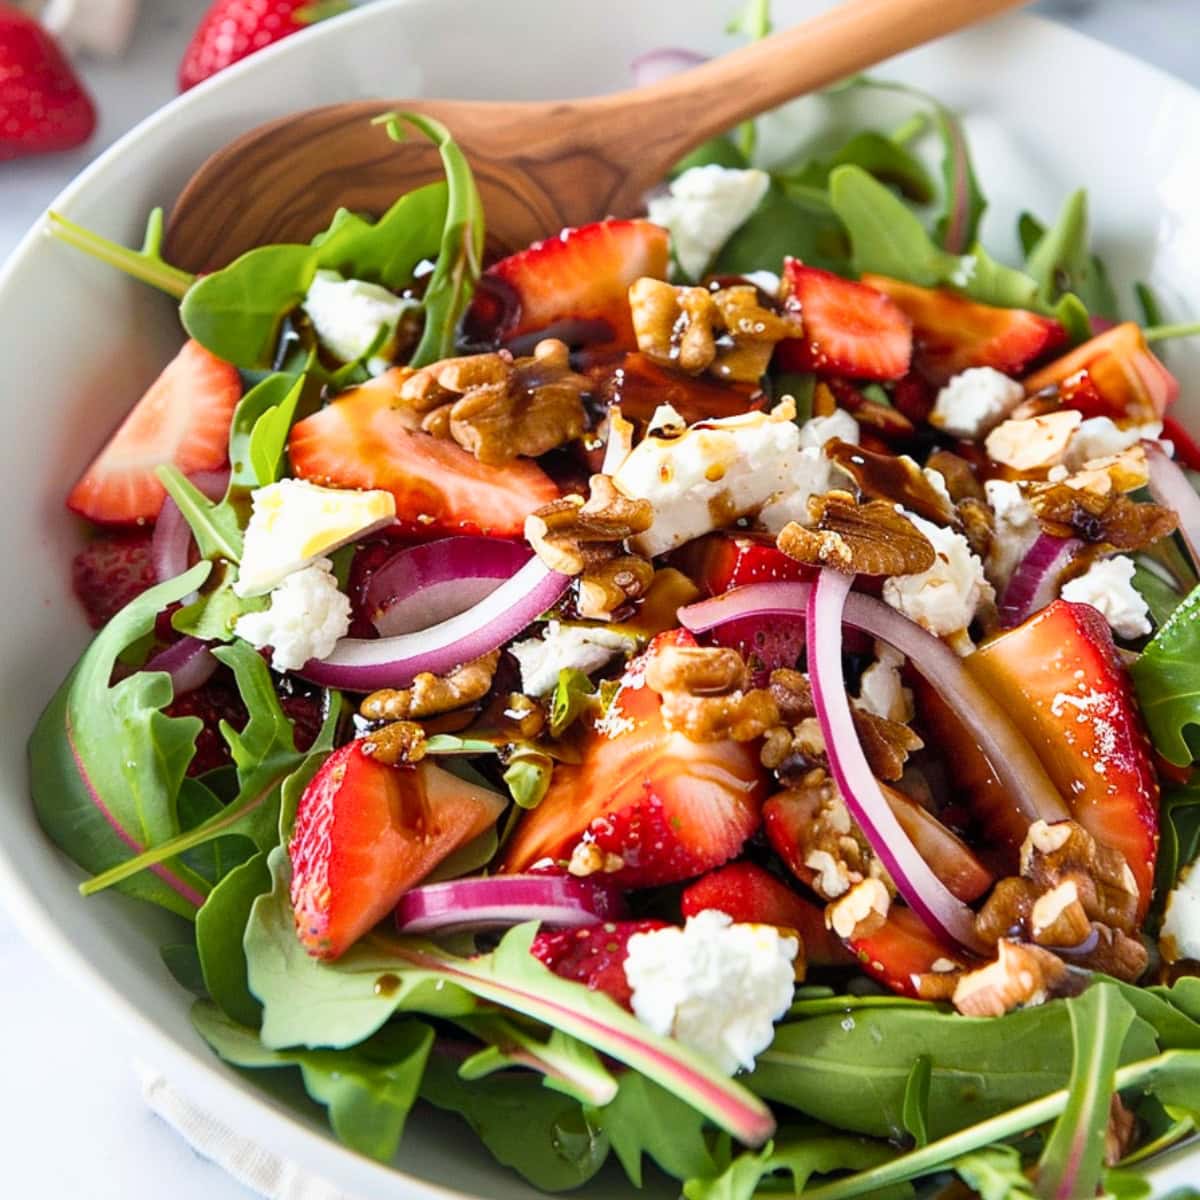 Mixed greens, sliced strawberries, red onion, and toasted walnuts with goat cheese in a white bowl.